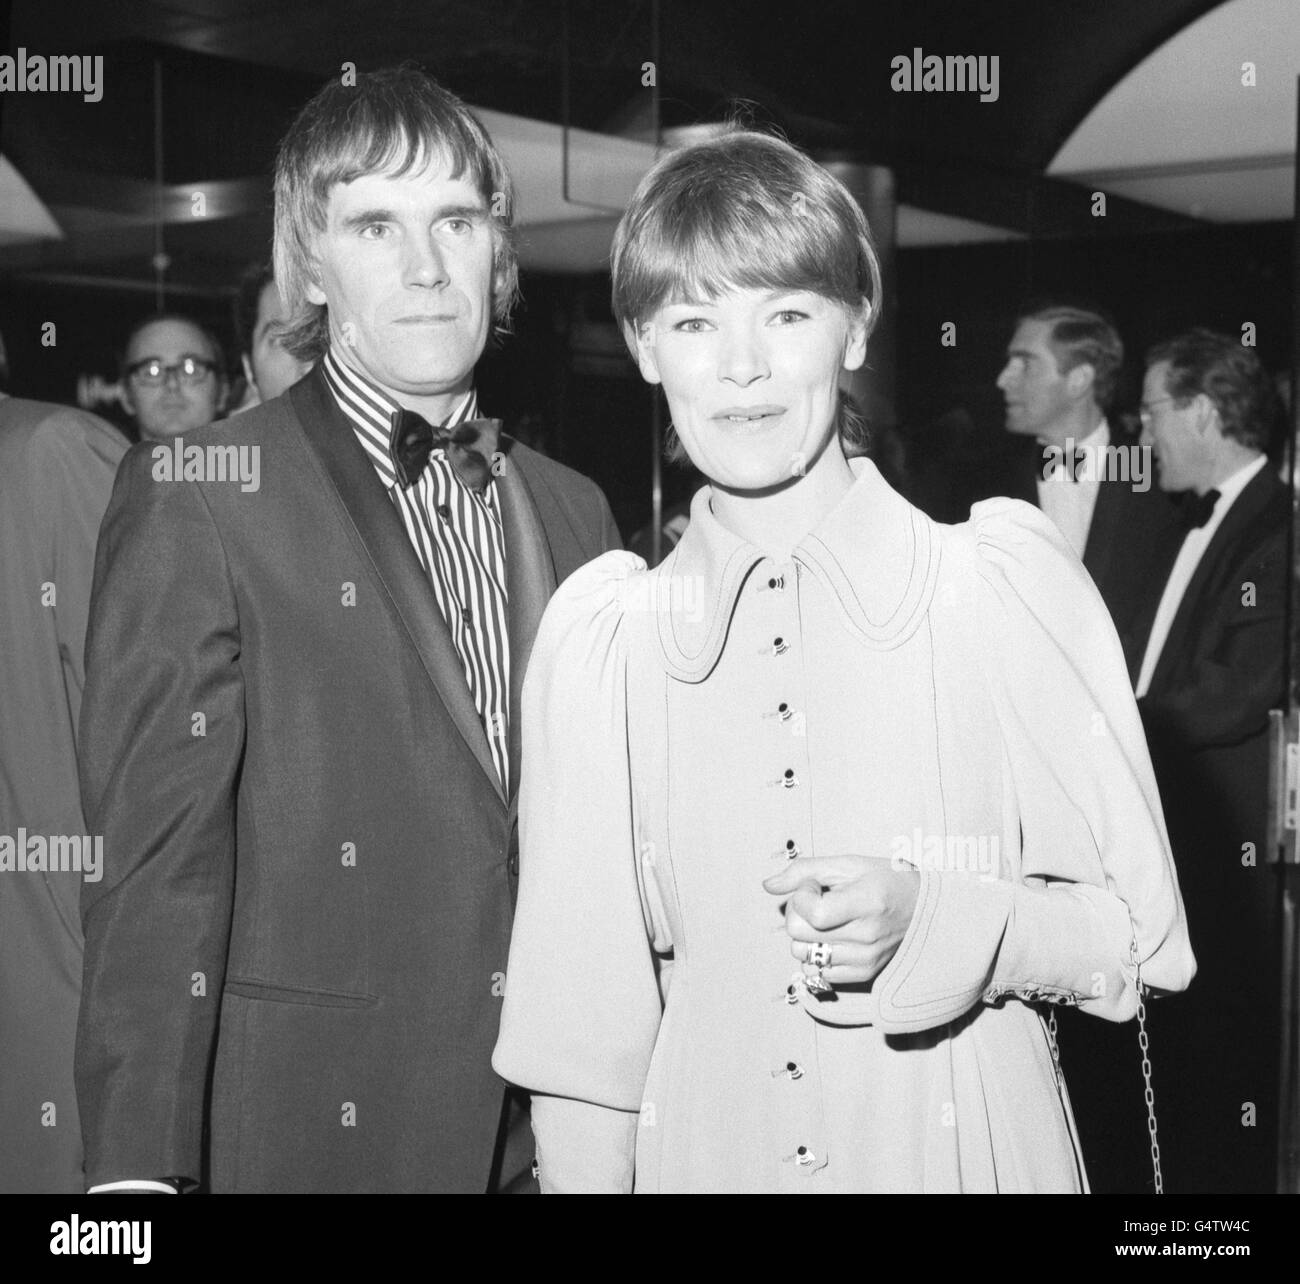 Glenda Jackson and her husband, Roy Hodges, as they arrive for the premiere of 'The Triple Echo' at The Universal, Piccadilly Circus. Stock Photo